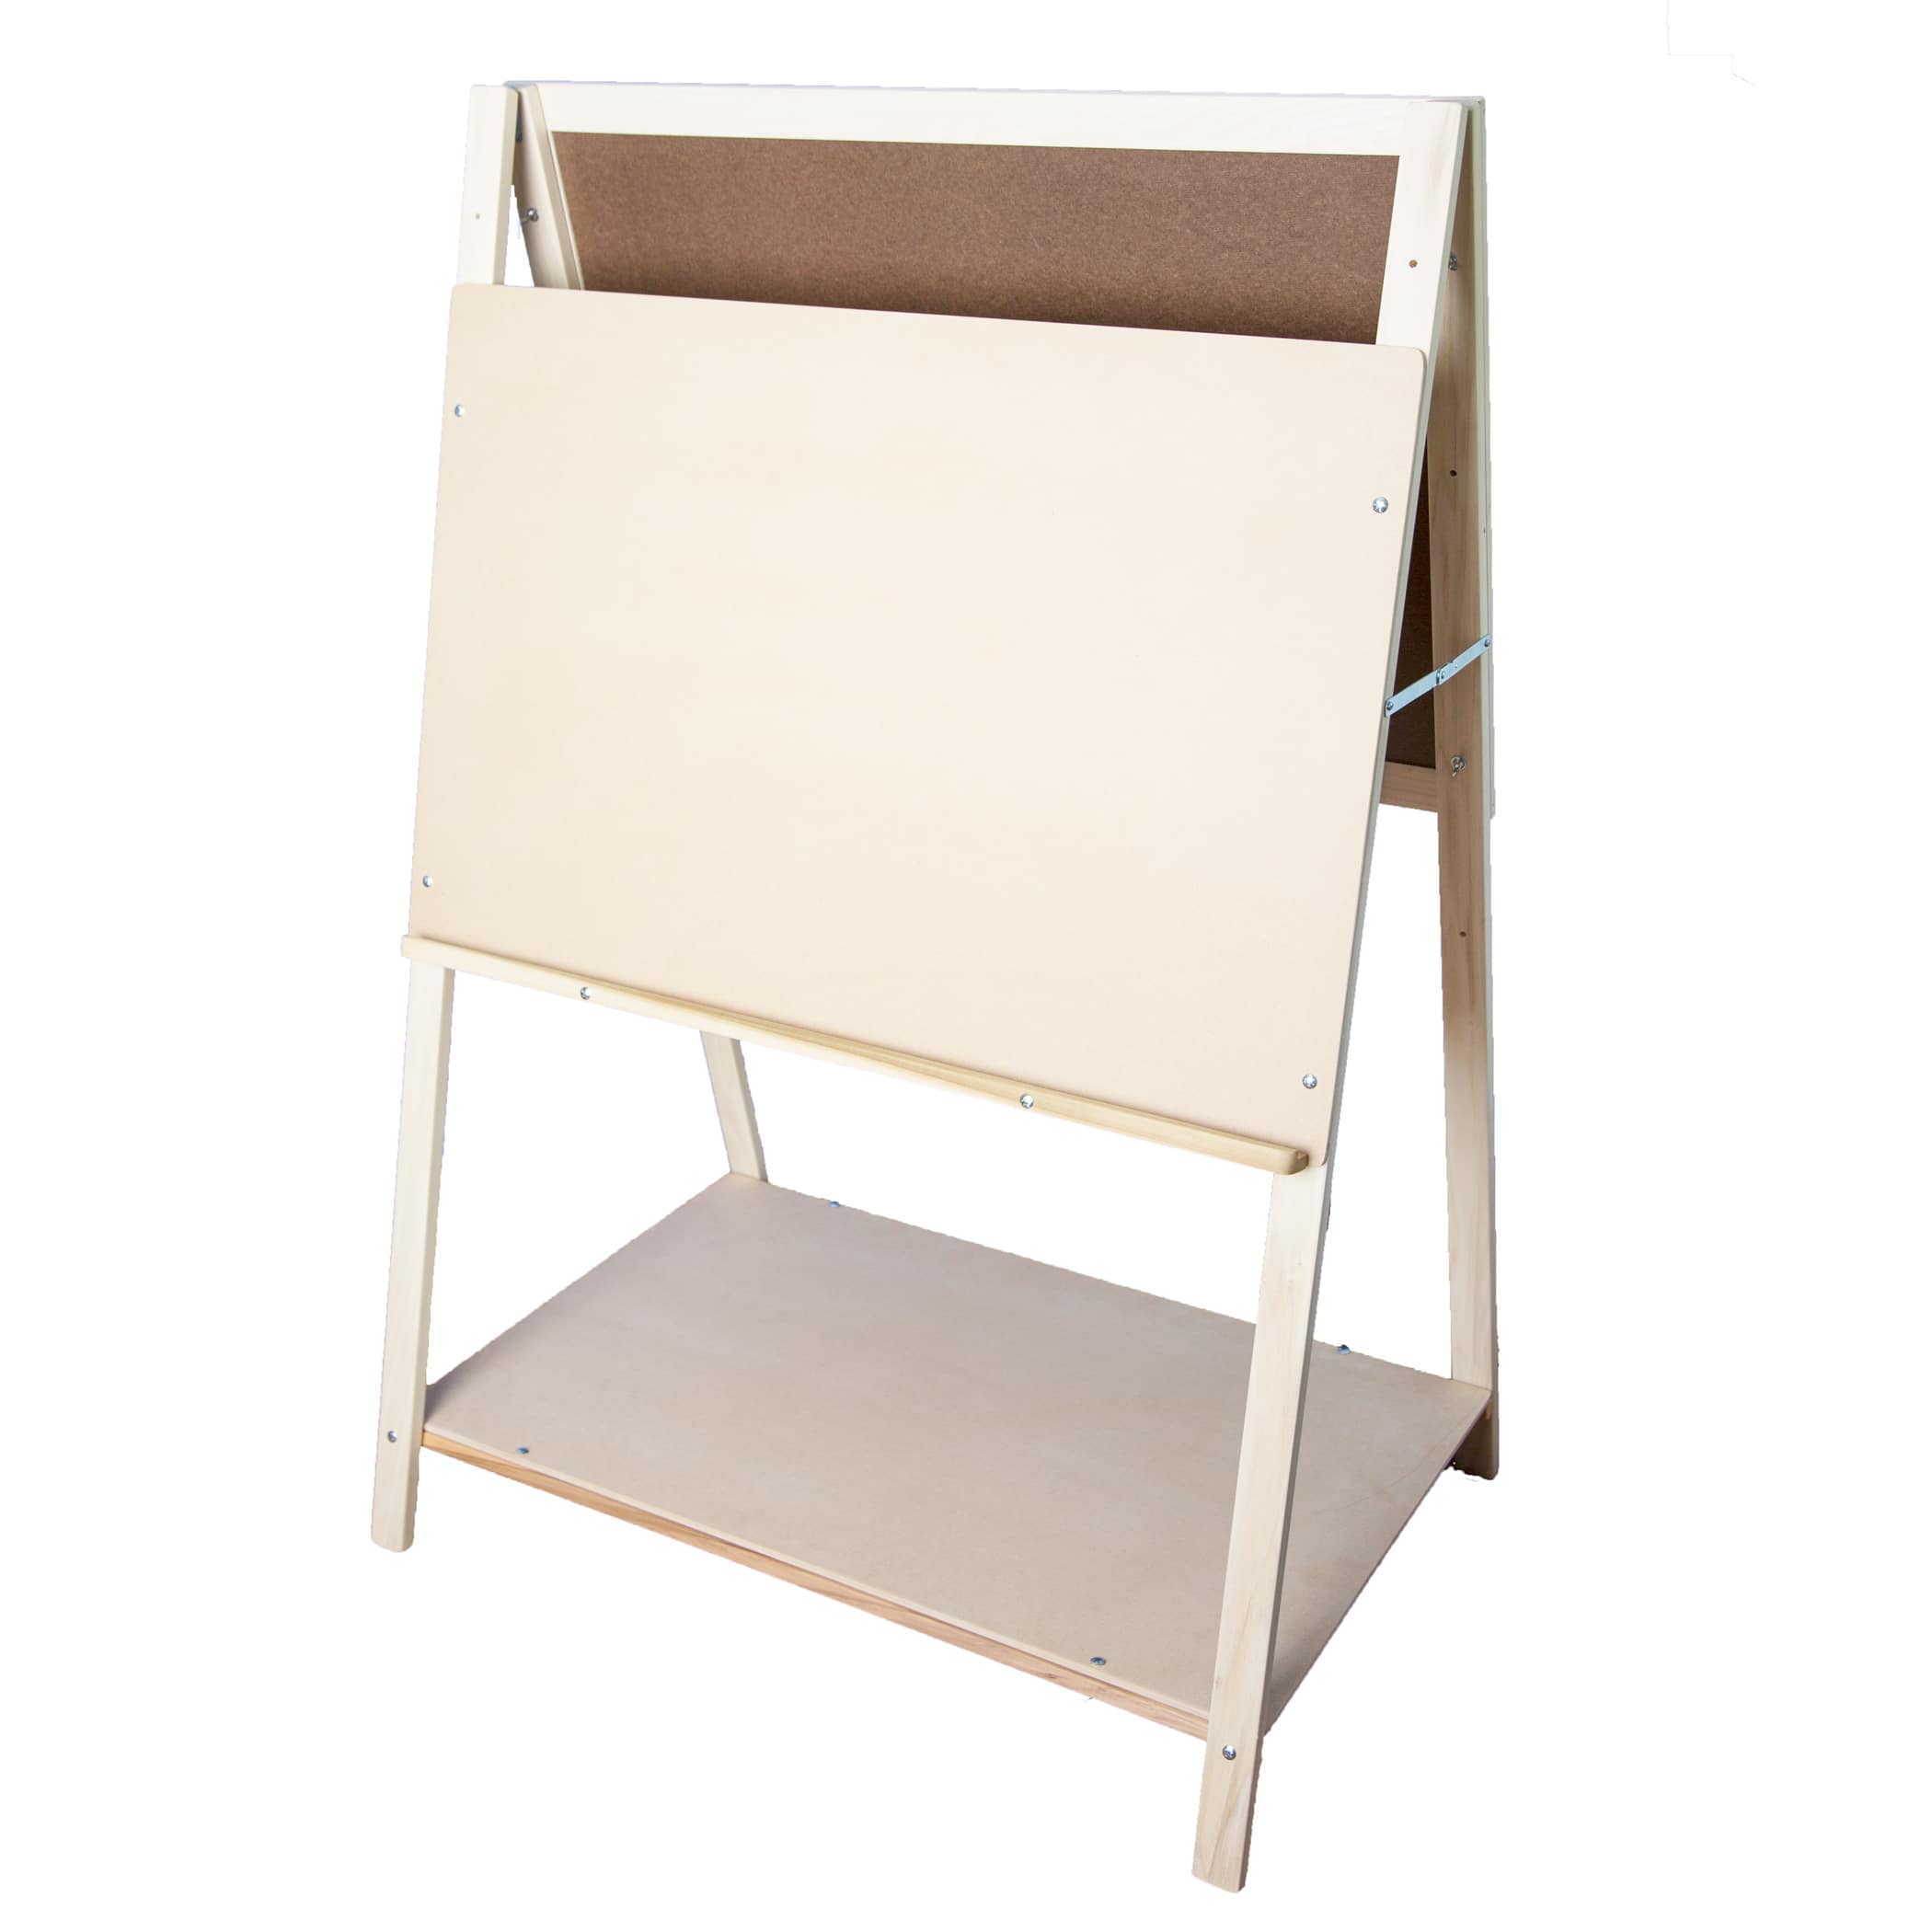 Teacher Easels & Classroom Easels - Today's Classroom